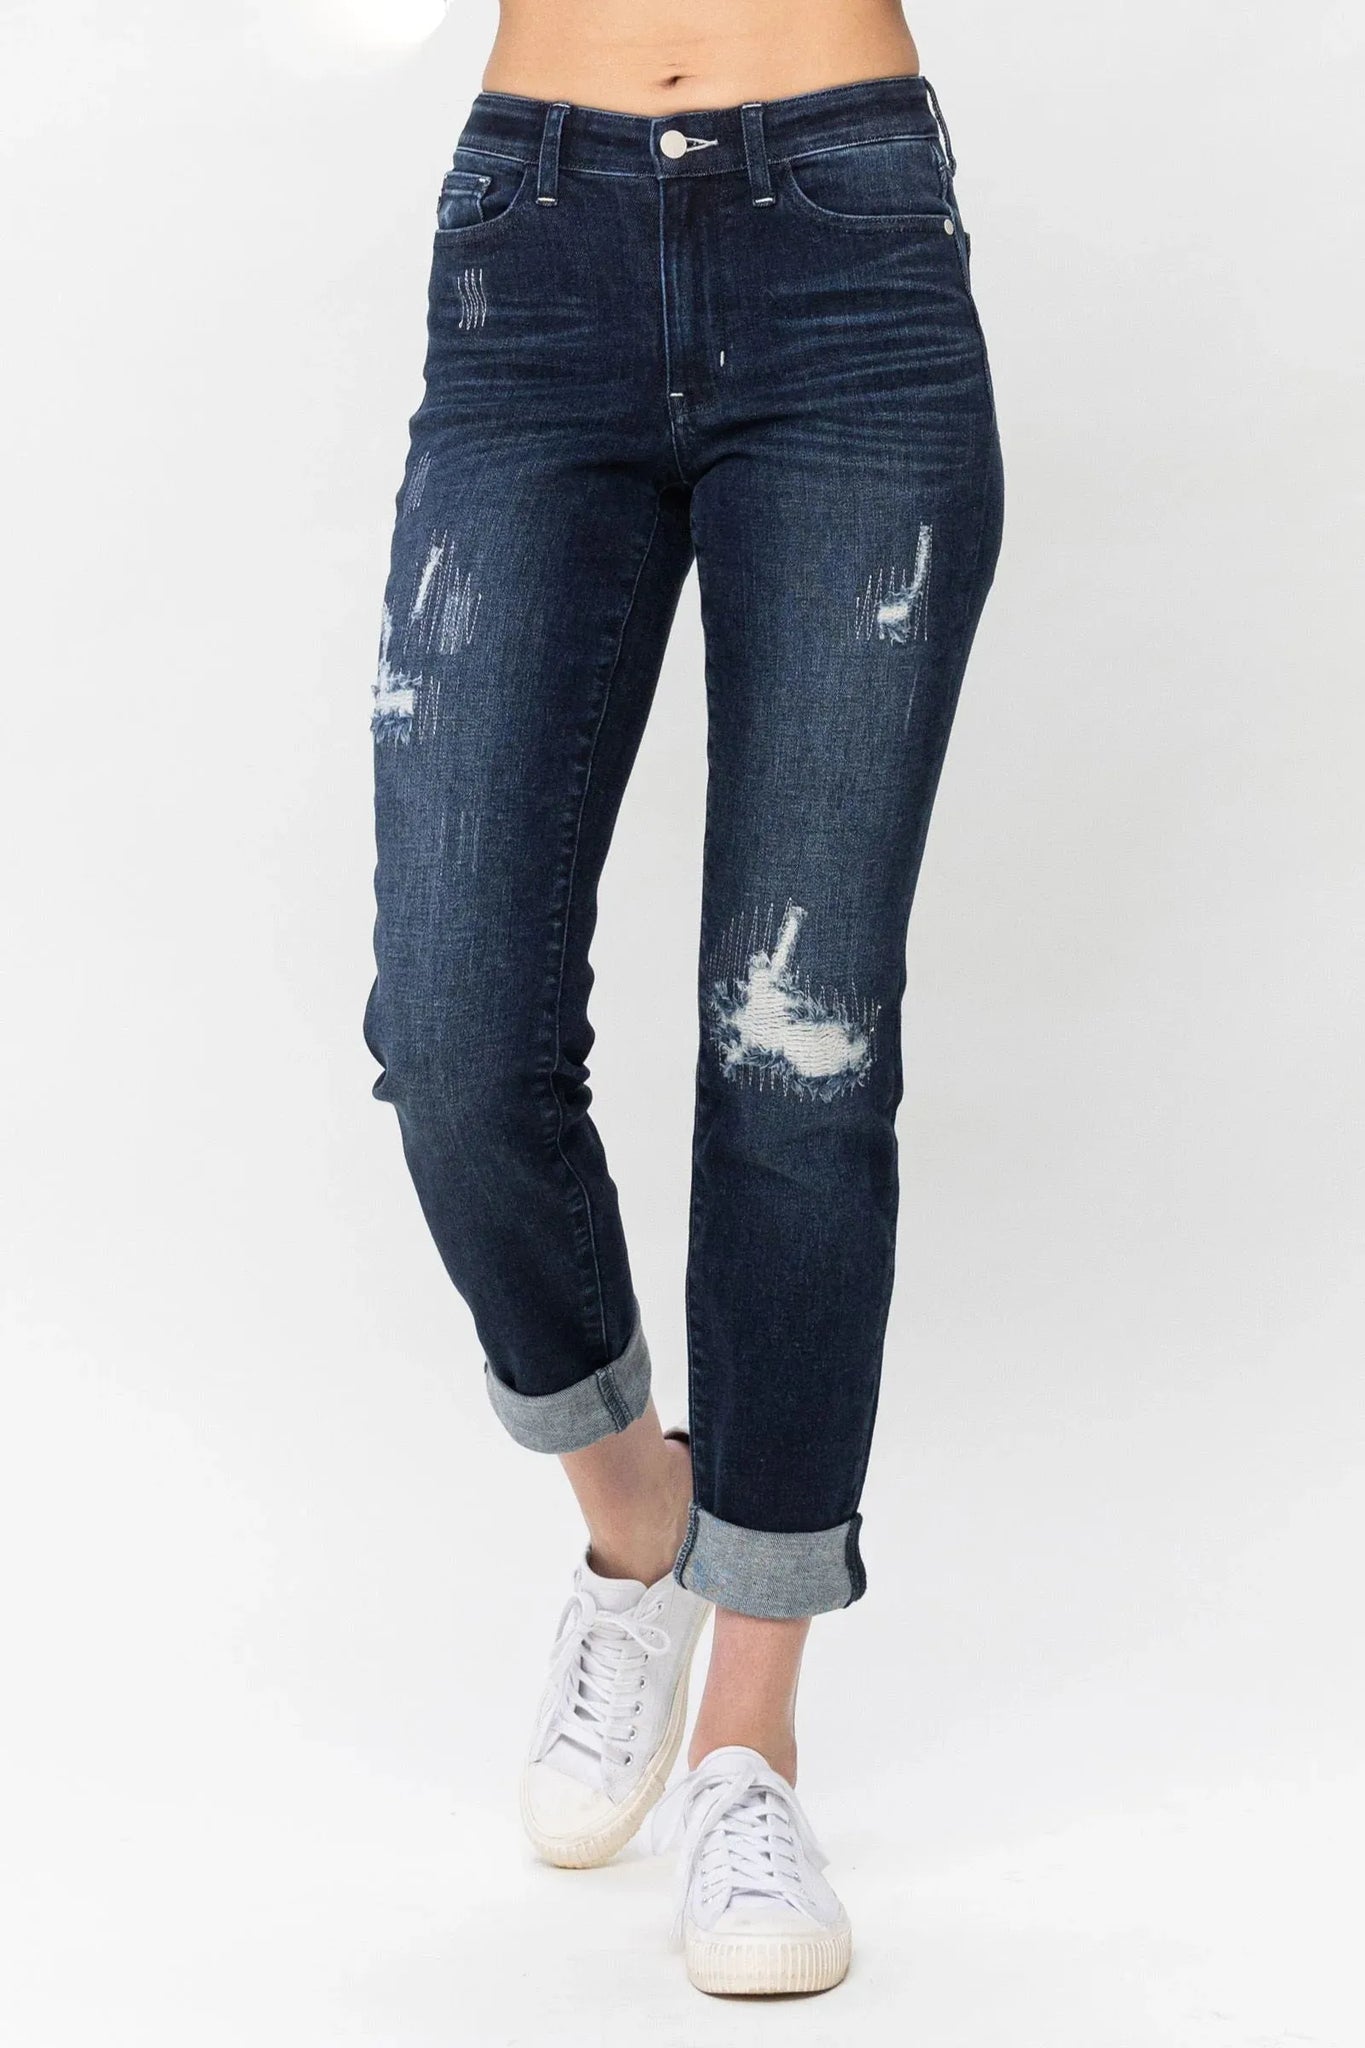 Judy Blue Mid Rise Stitched Destroy & Double Cuff pants.